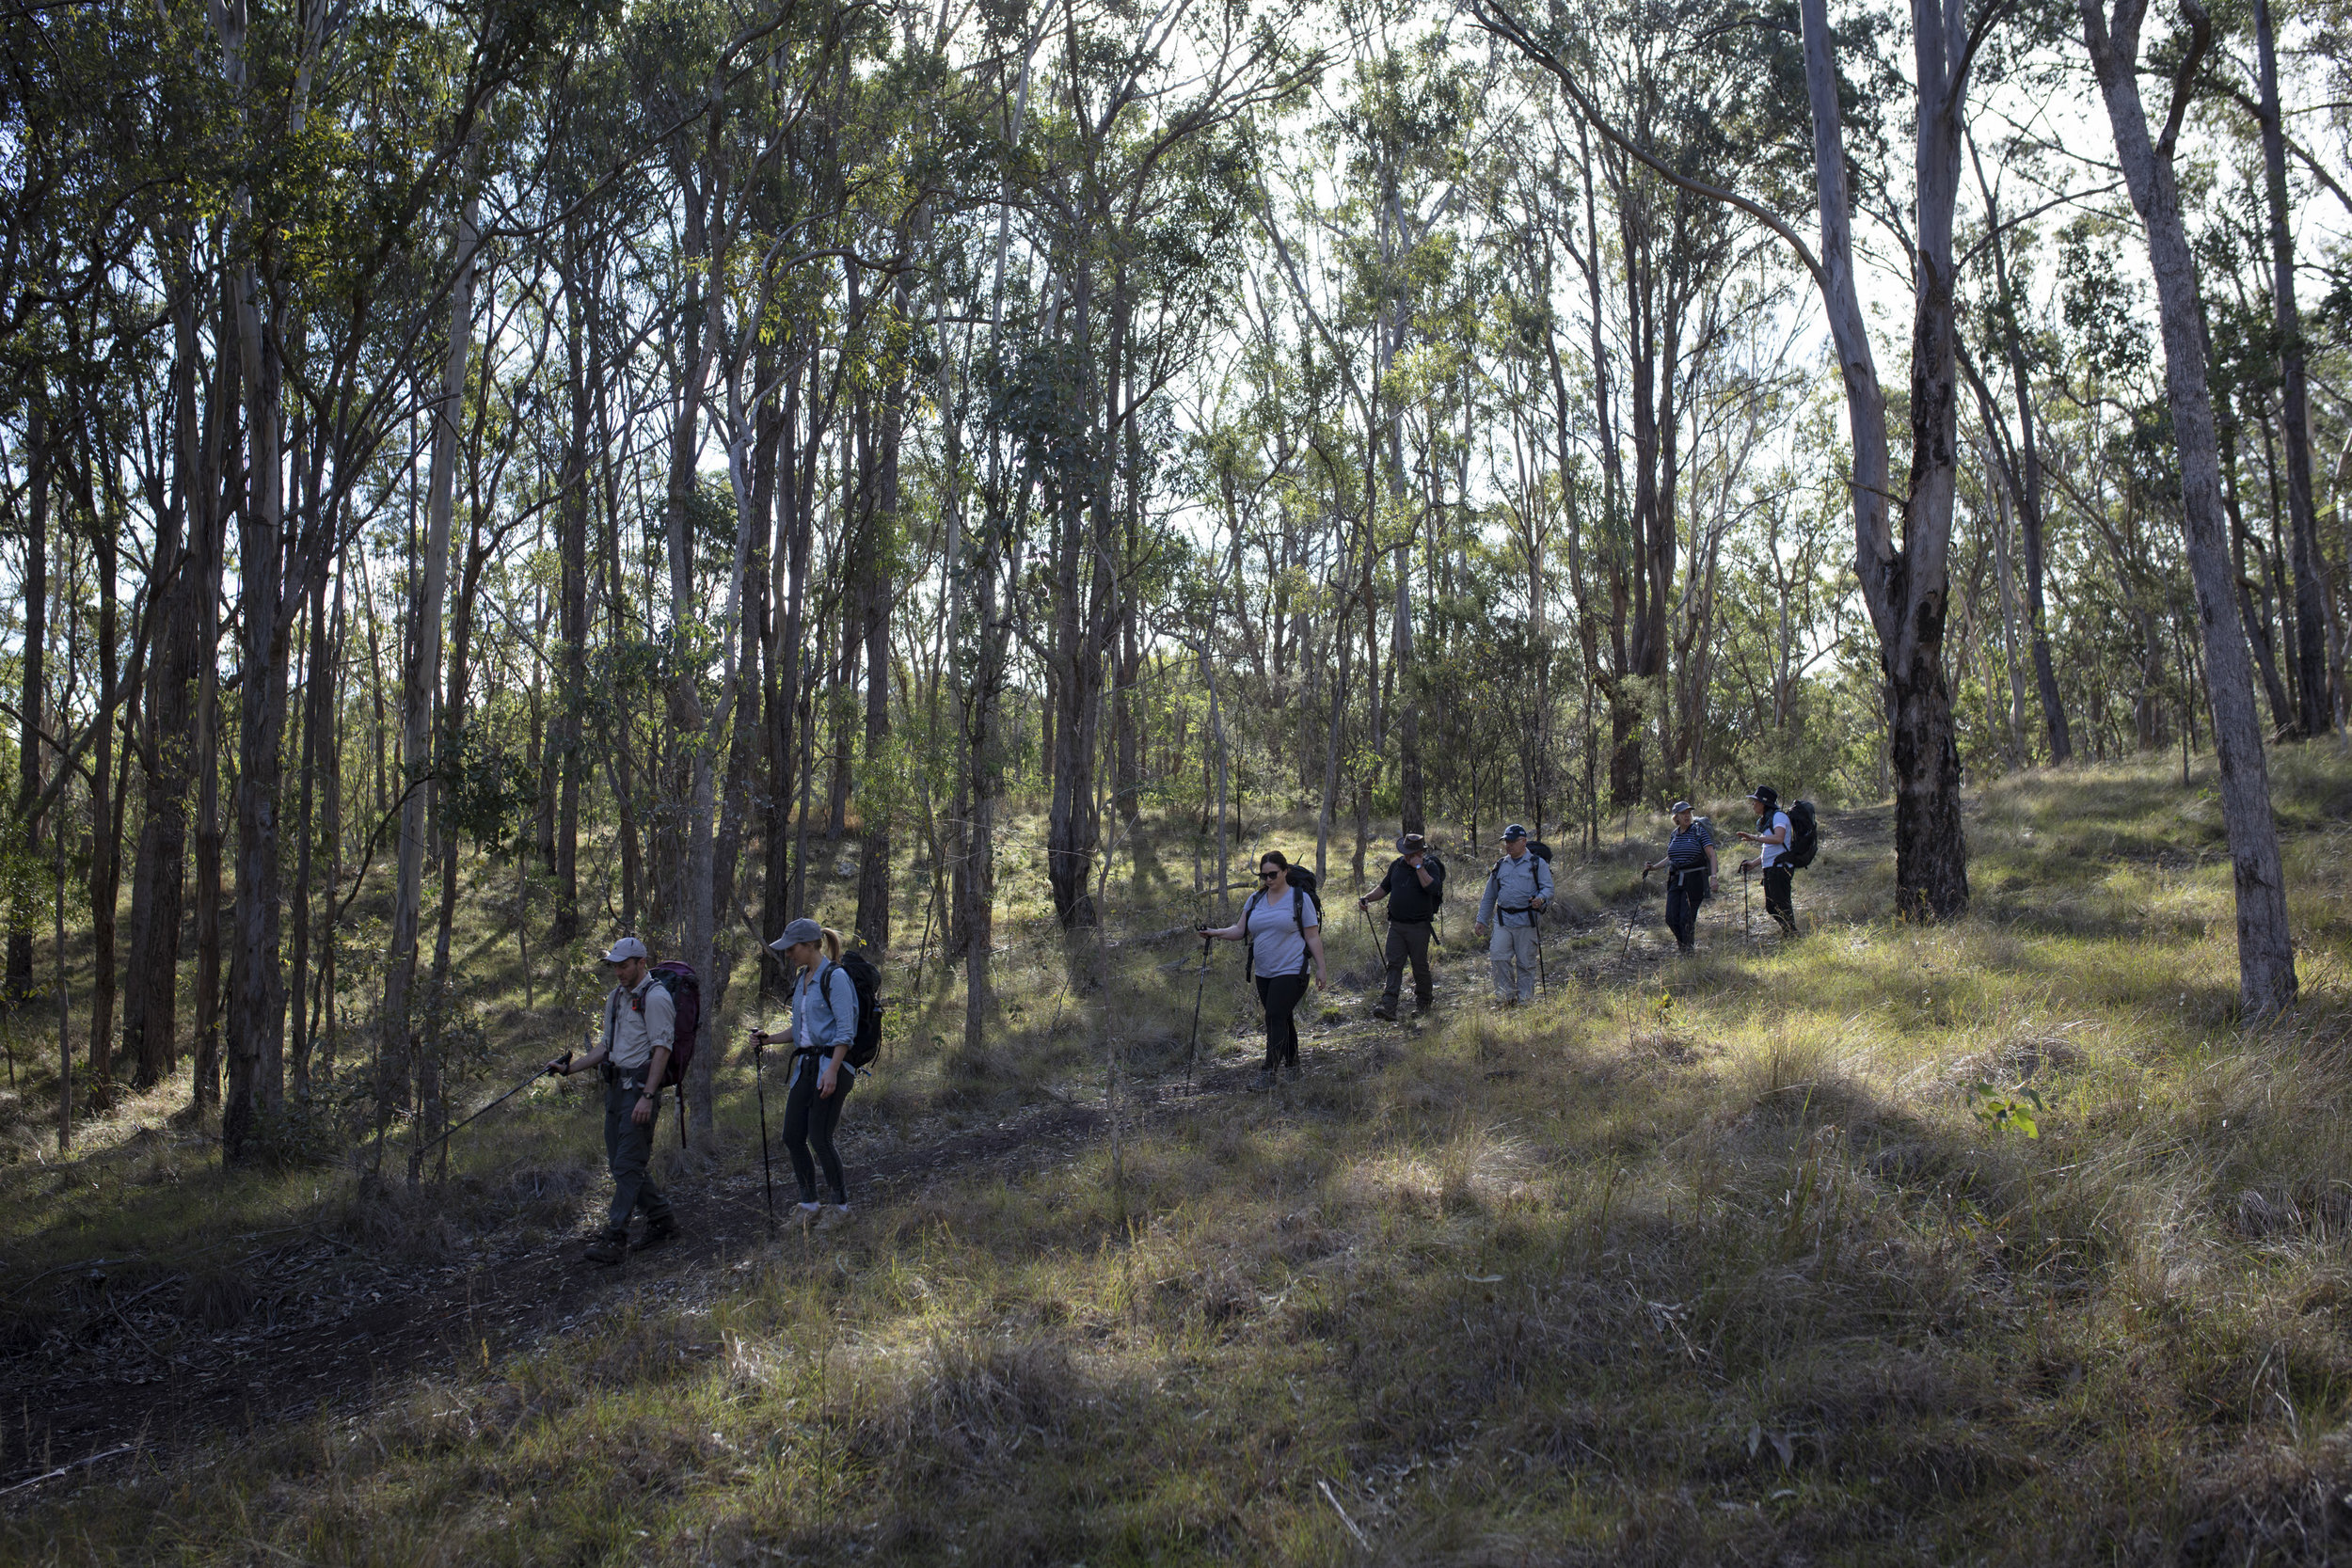  Qantas Magazine/Scenic Rim Walk.
The walk on Spicers Station Land.

Photography : Russell Shakespeare 